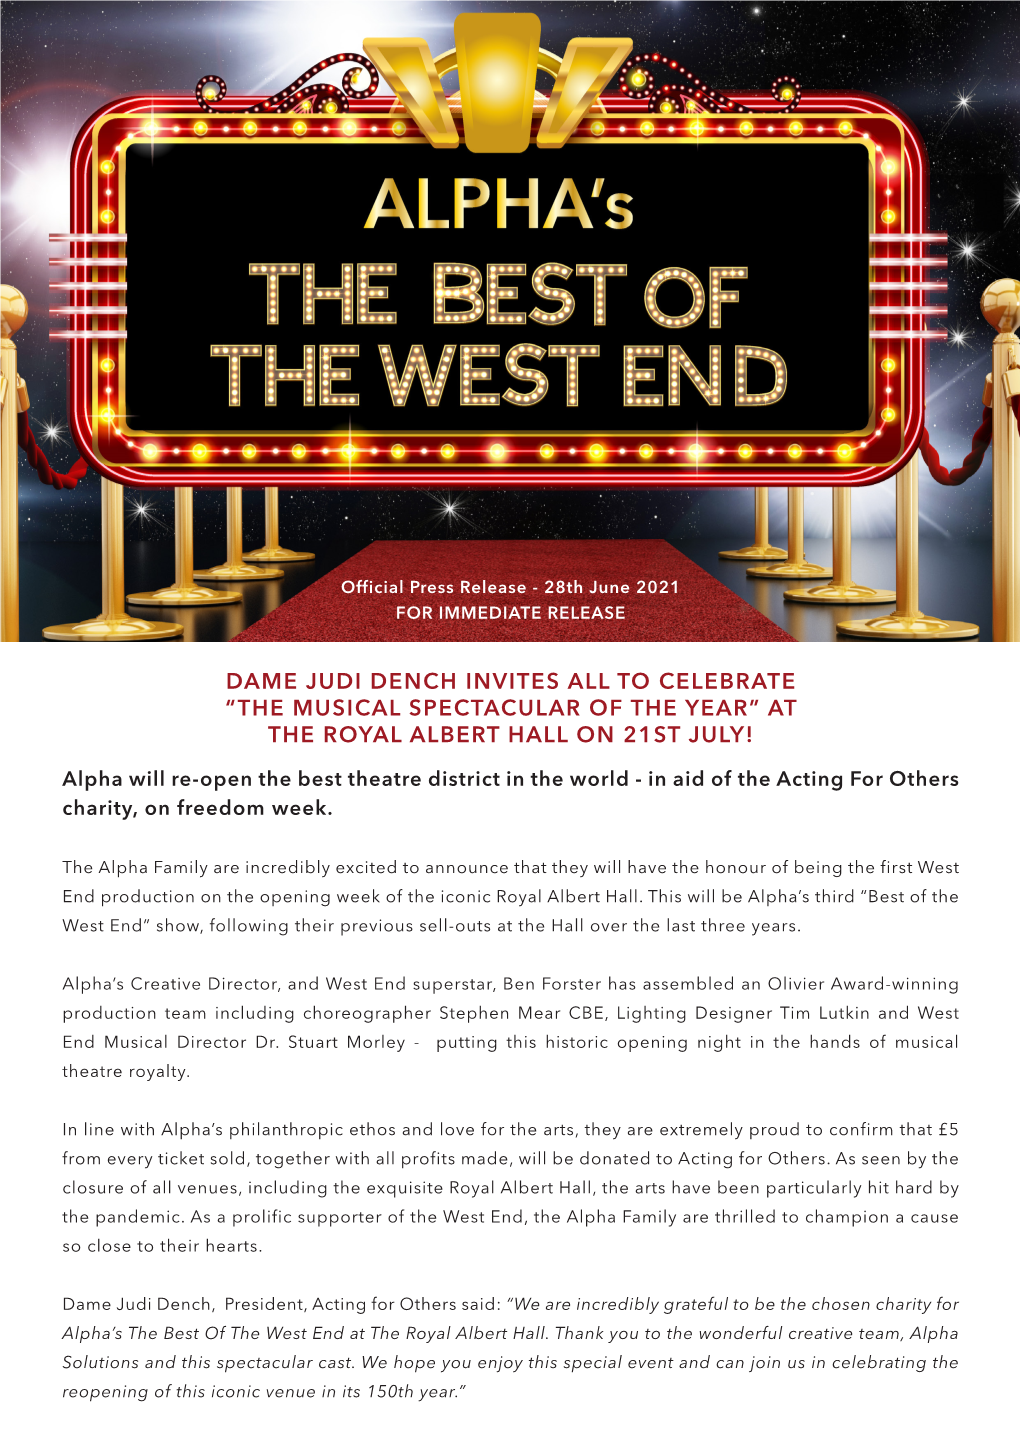 Dame Judi Dench Invites All to Celebrate “The Musical Spectacular of the Year” at the Royal Albert Hall on 21St July!